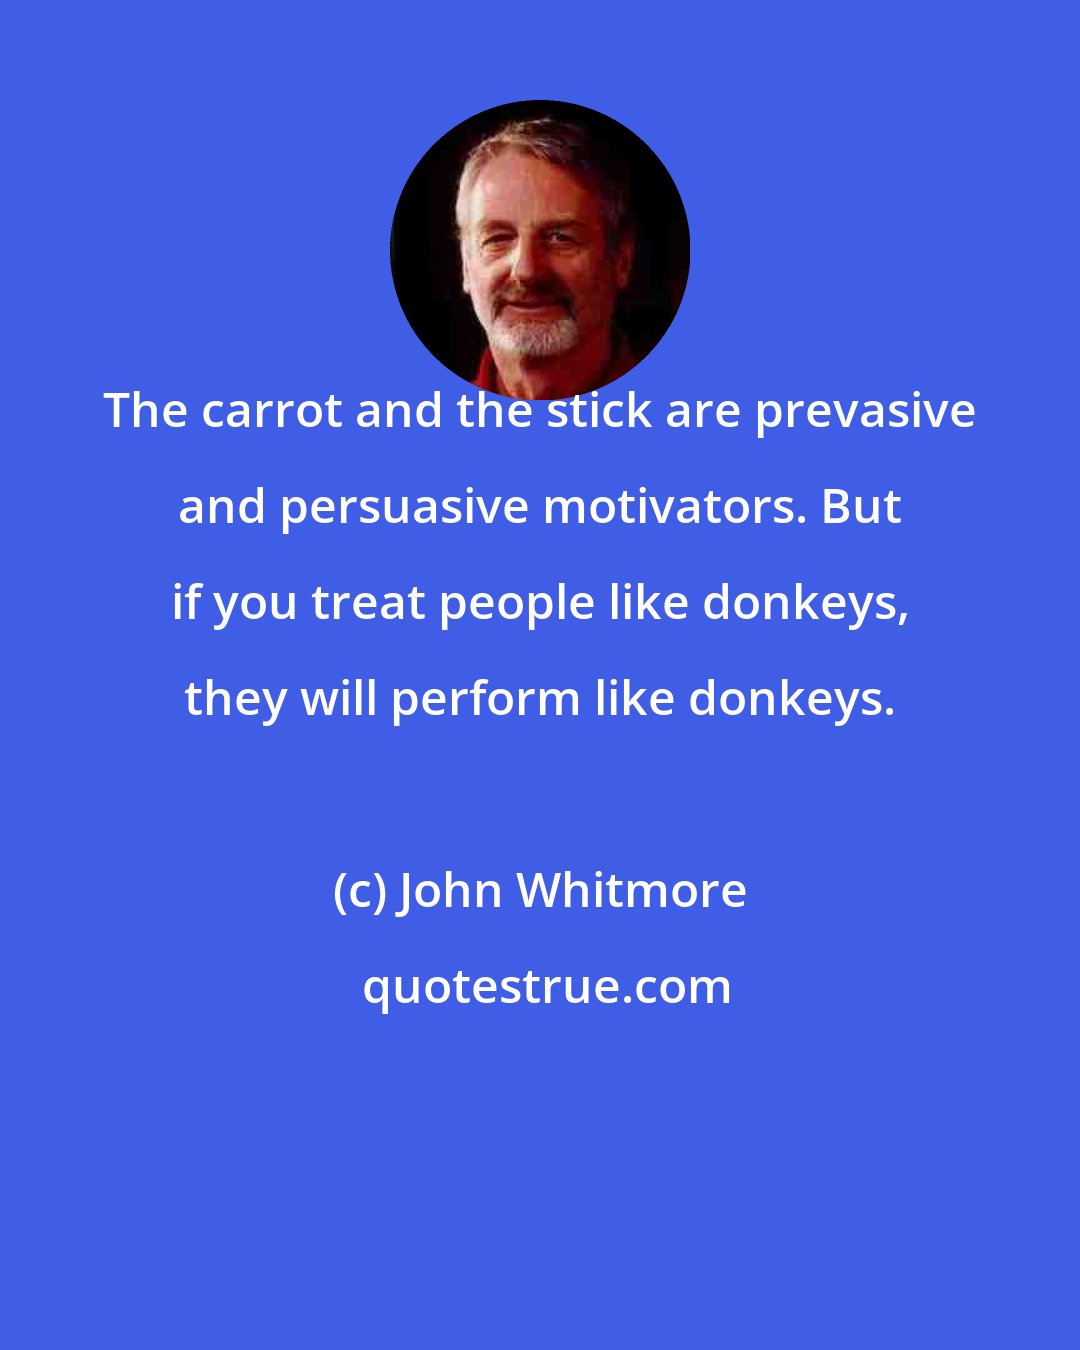 John Whitmore: The carrot and the stick are prevasive and persuasive motivators. But if you treat people like donkeys, they will perform like donkeys.